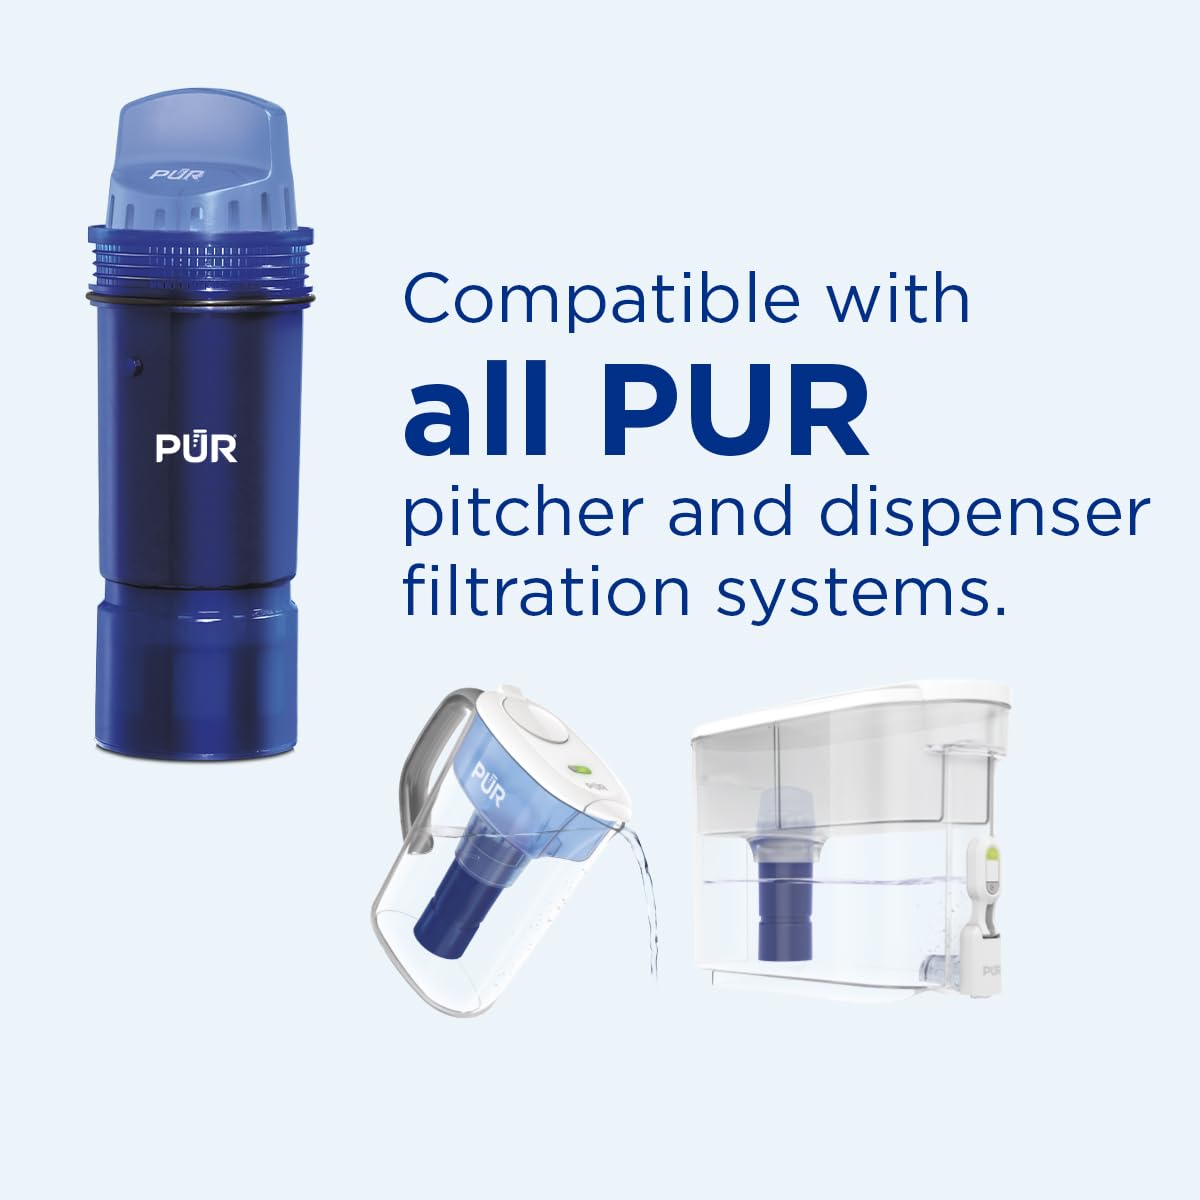 PUR PLUS Water Pitcher & Dispenser Replacement Filter 3-Pack, Genuine PUR Filter, 3-in-1 Powerful Filtration for More Chemical & Physical Substance Reduction, 6-Month Value, Blue (CRF950Z3)